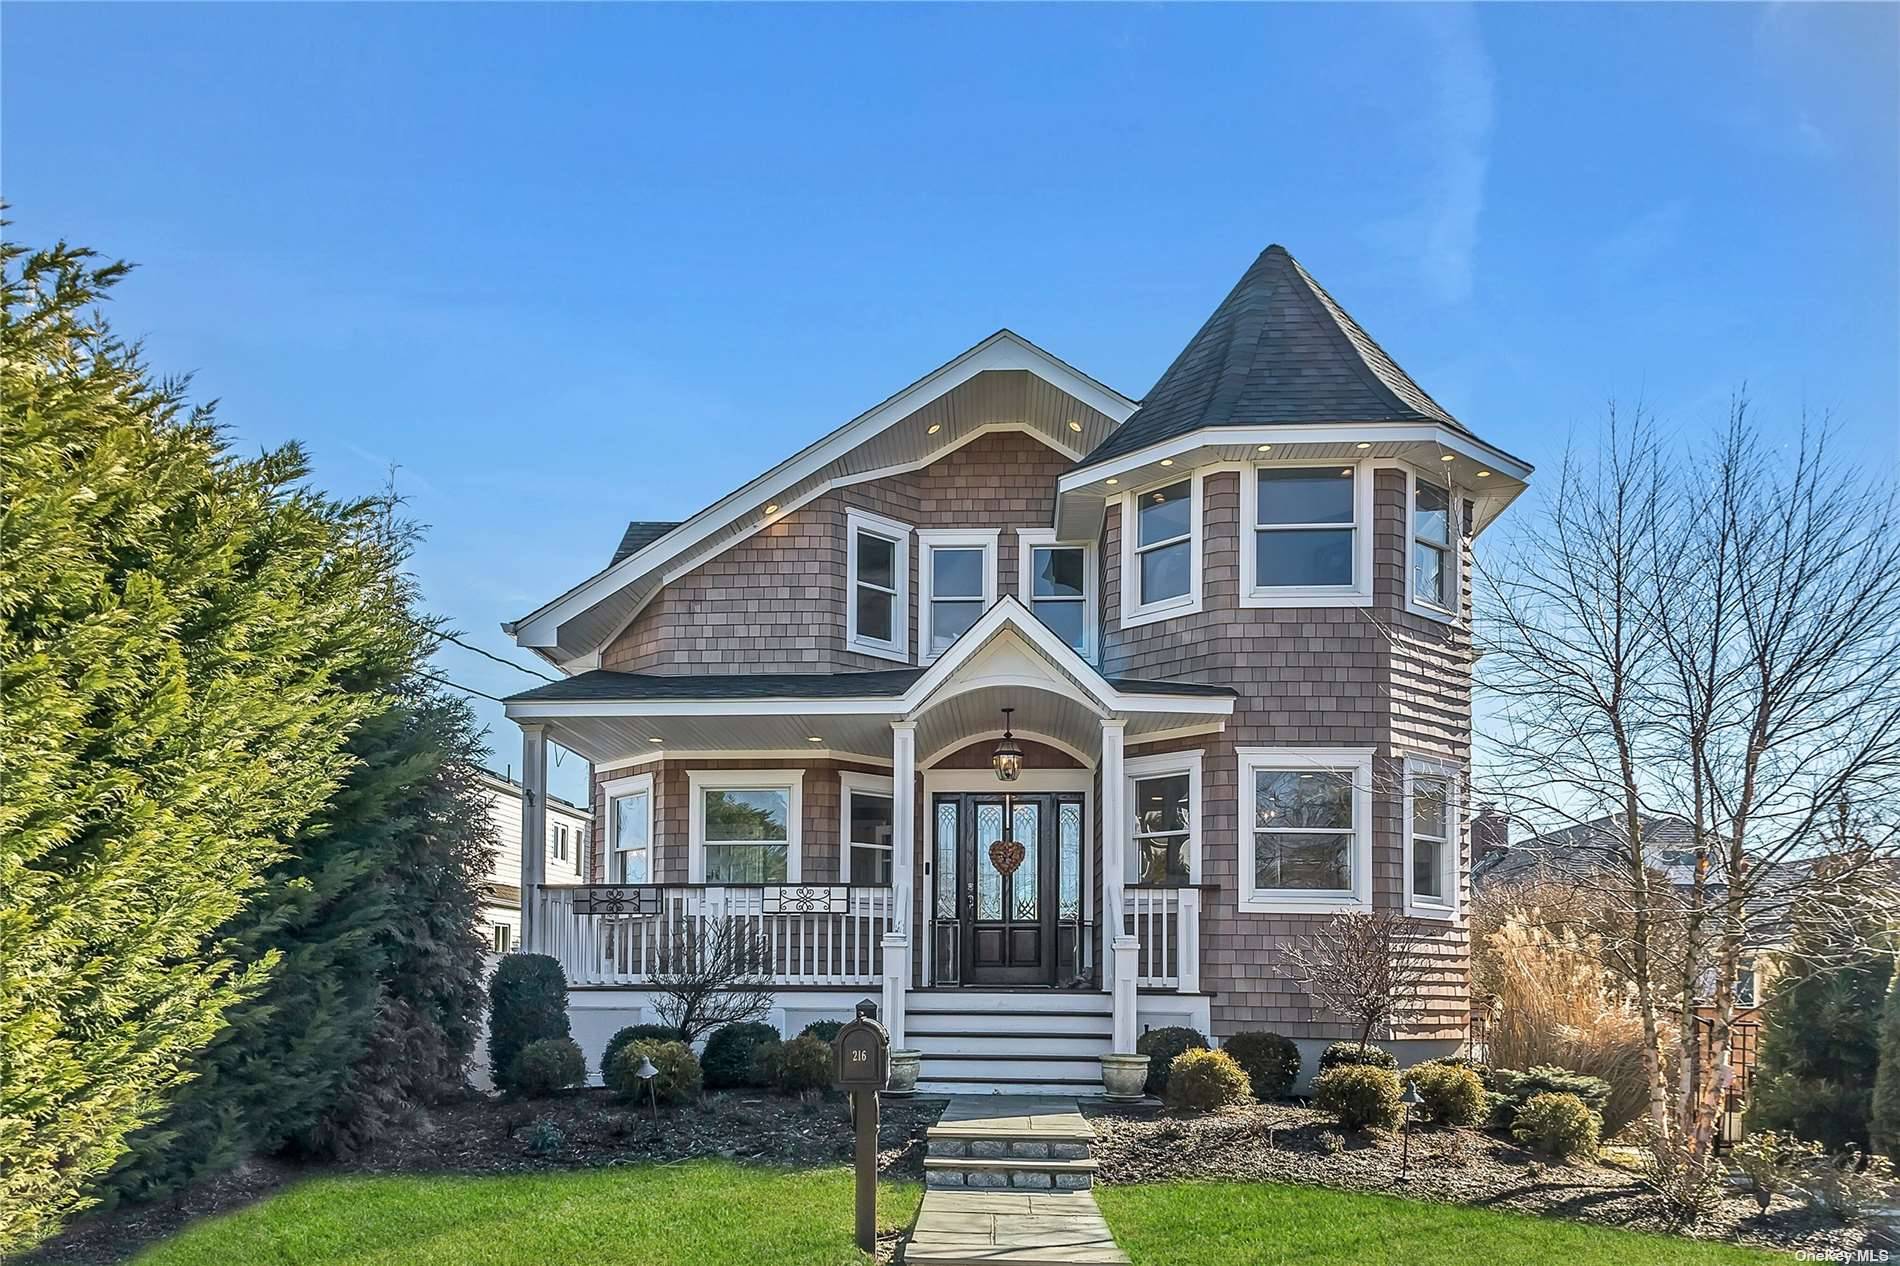 The Hamptons meets Amityville in this spectacular and unique fully renovated waterfront home.